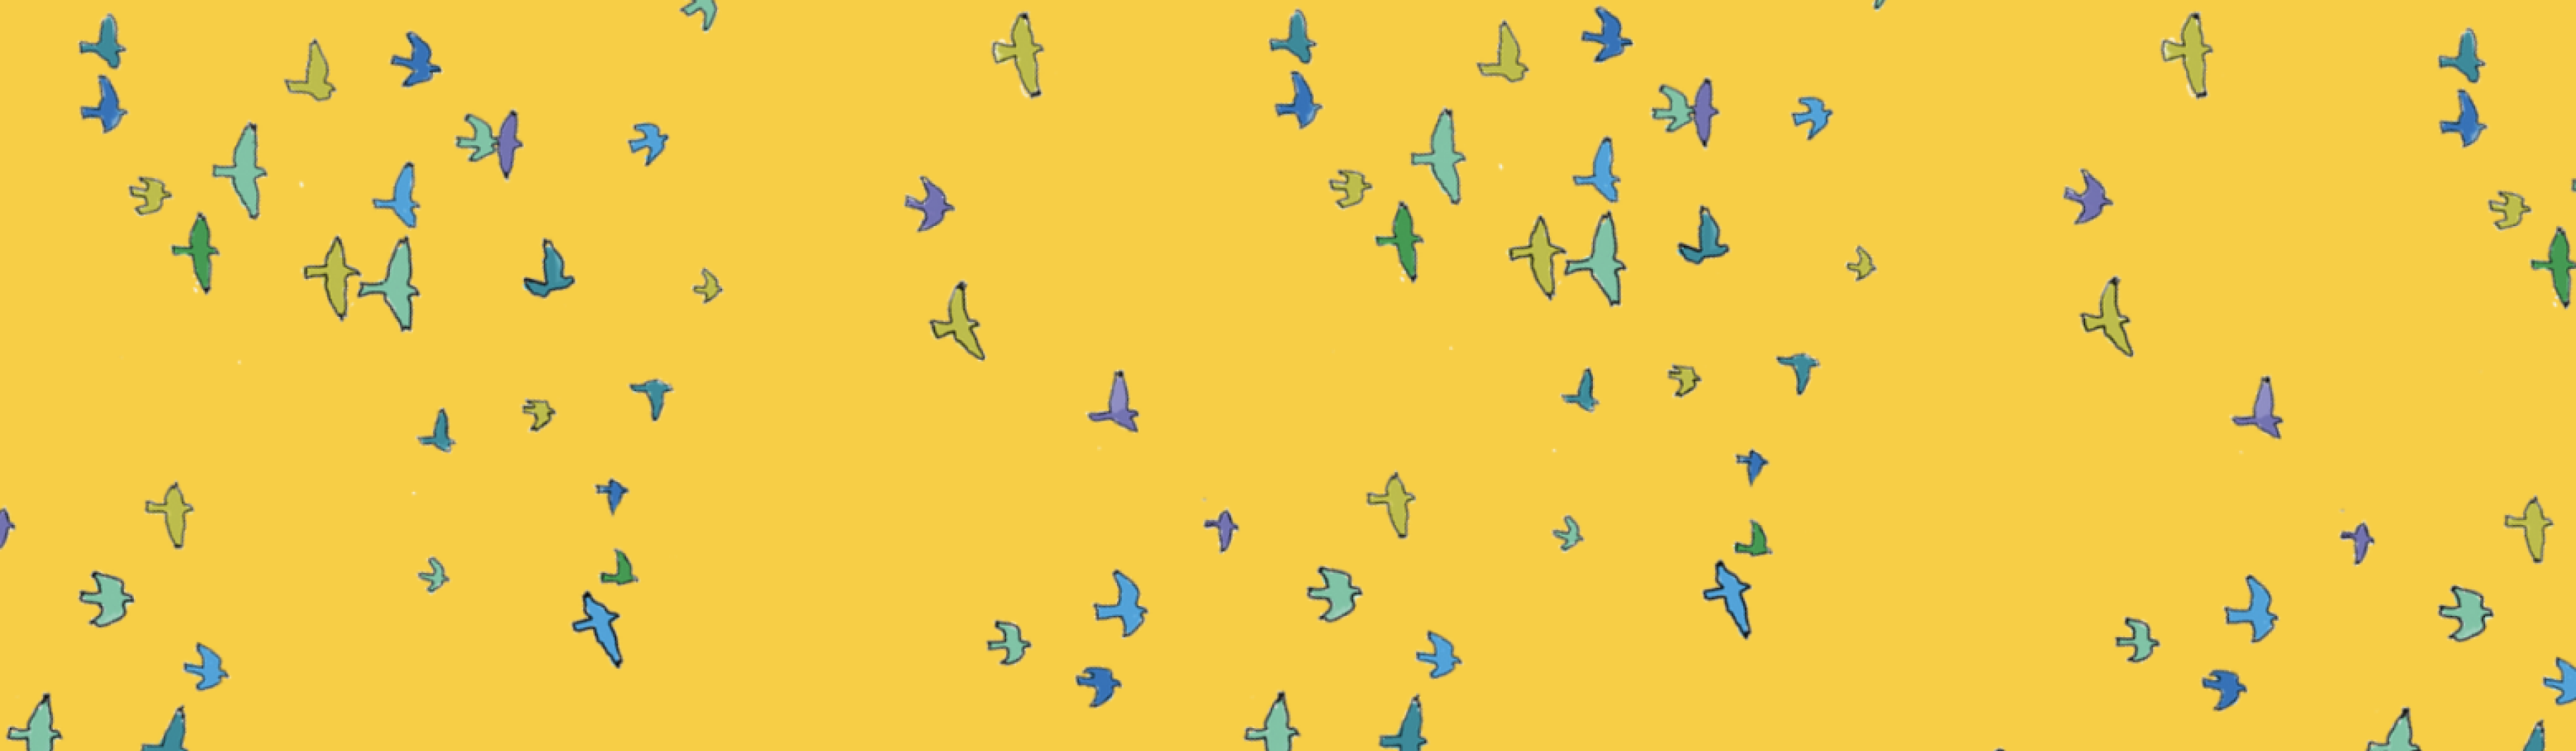 Illustration of various blue, yellow, purple birds on a yellow background.